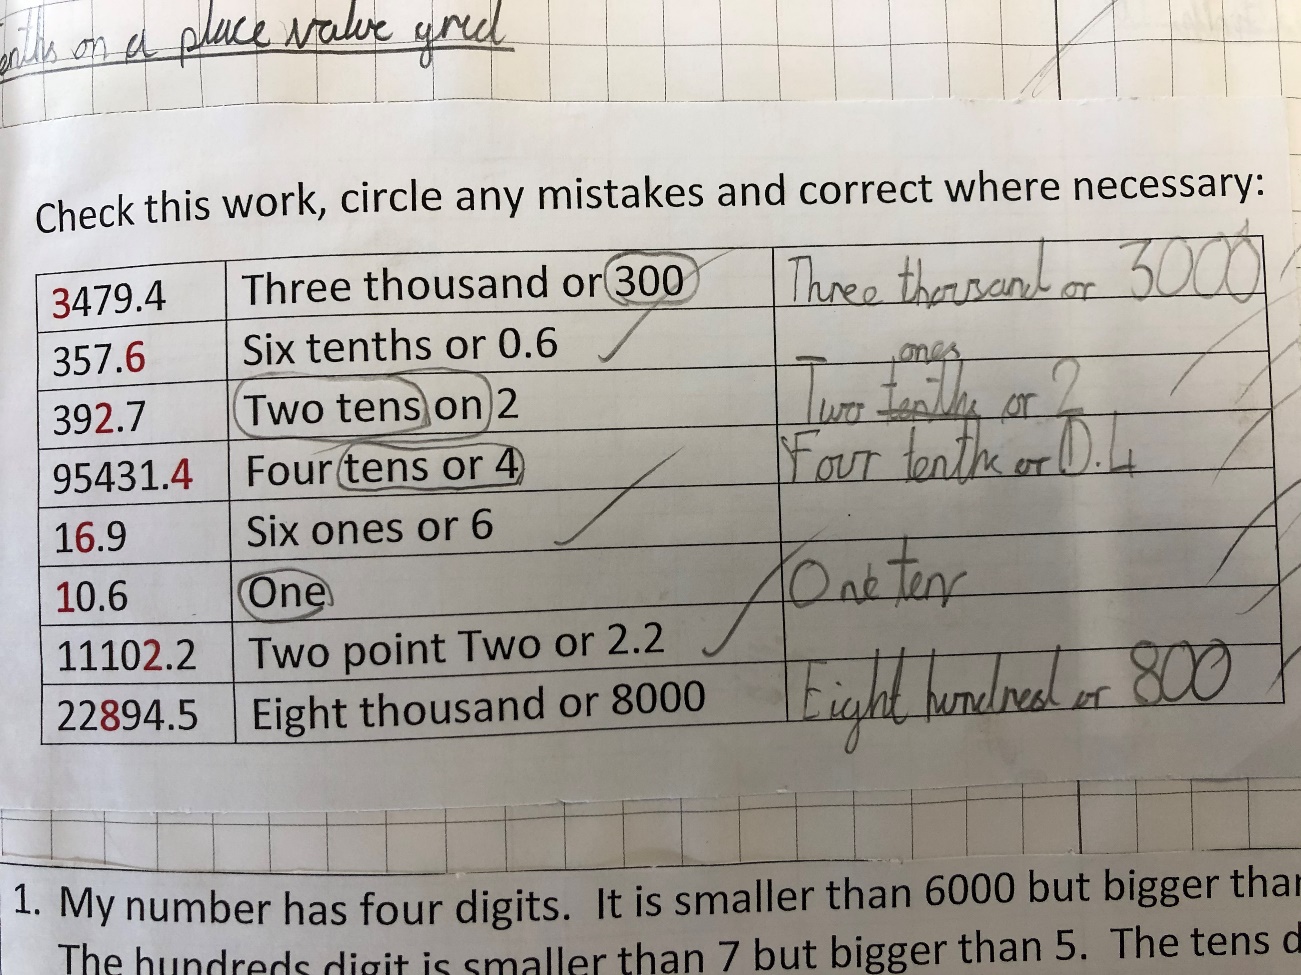 Image shows a partially completed table listing examples of tenths or decimals, with some mistakes, with the instruction to circle any mistakes and correct. A pupil has completed the table, and circled and corrected mistakes.